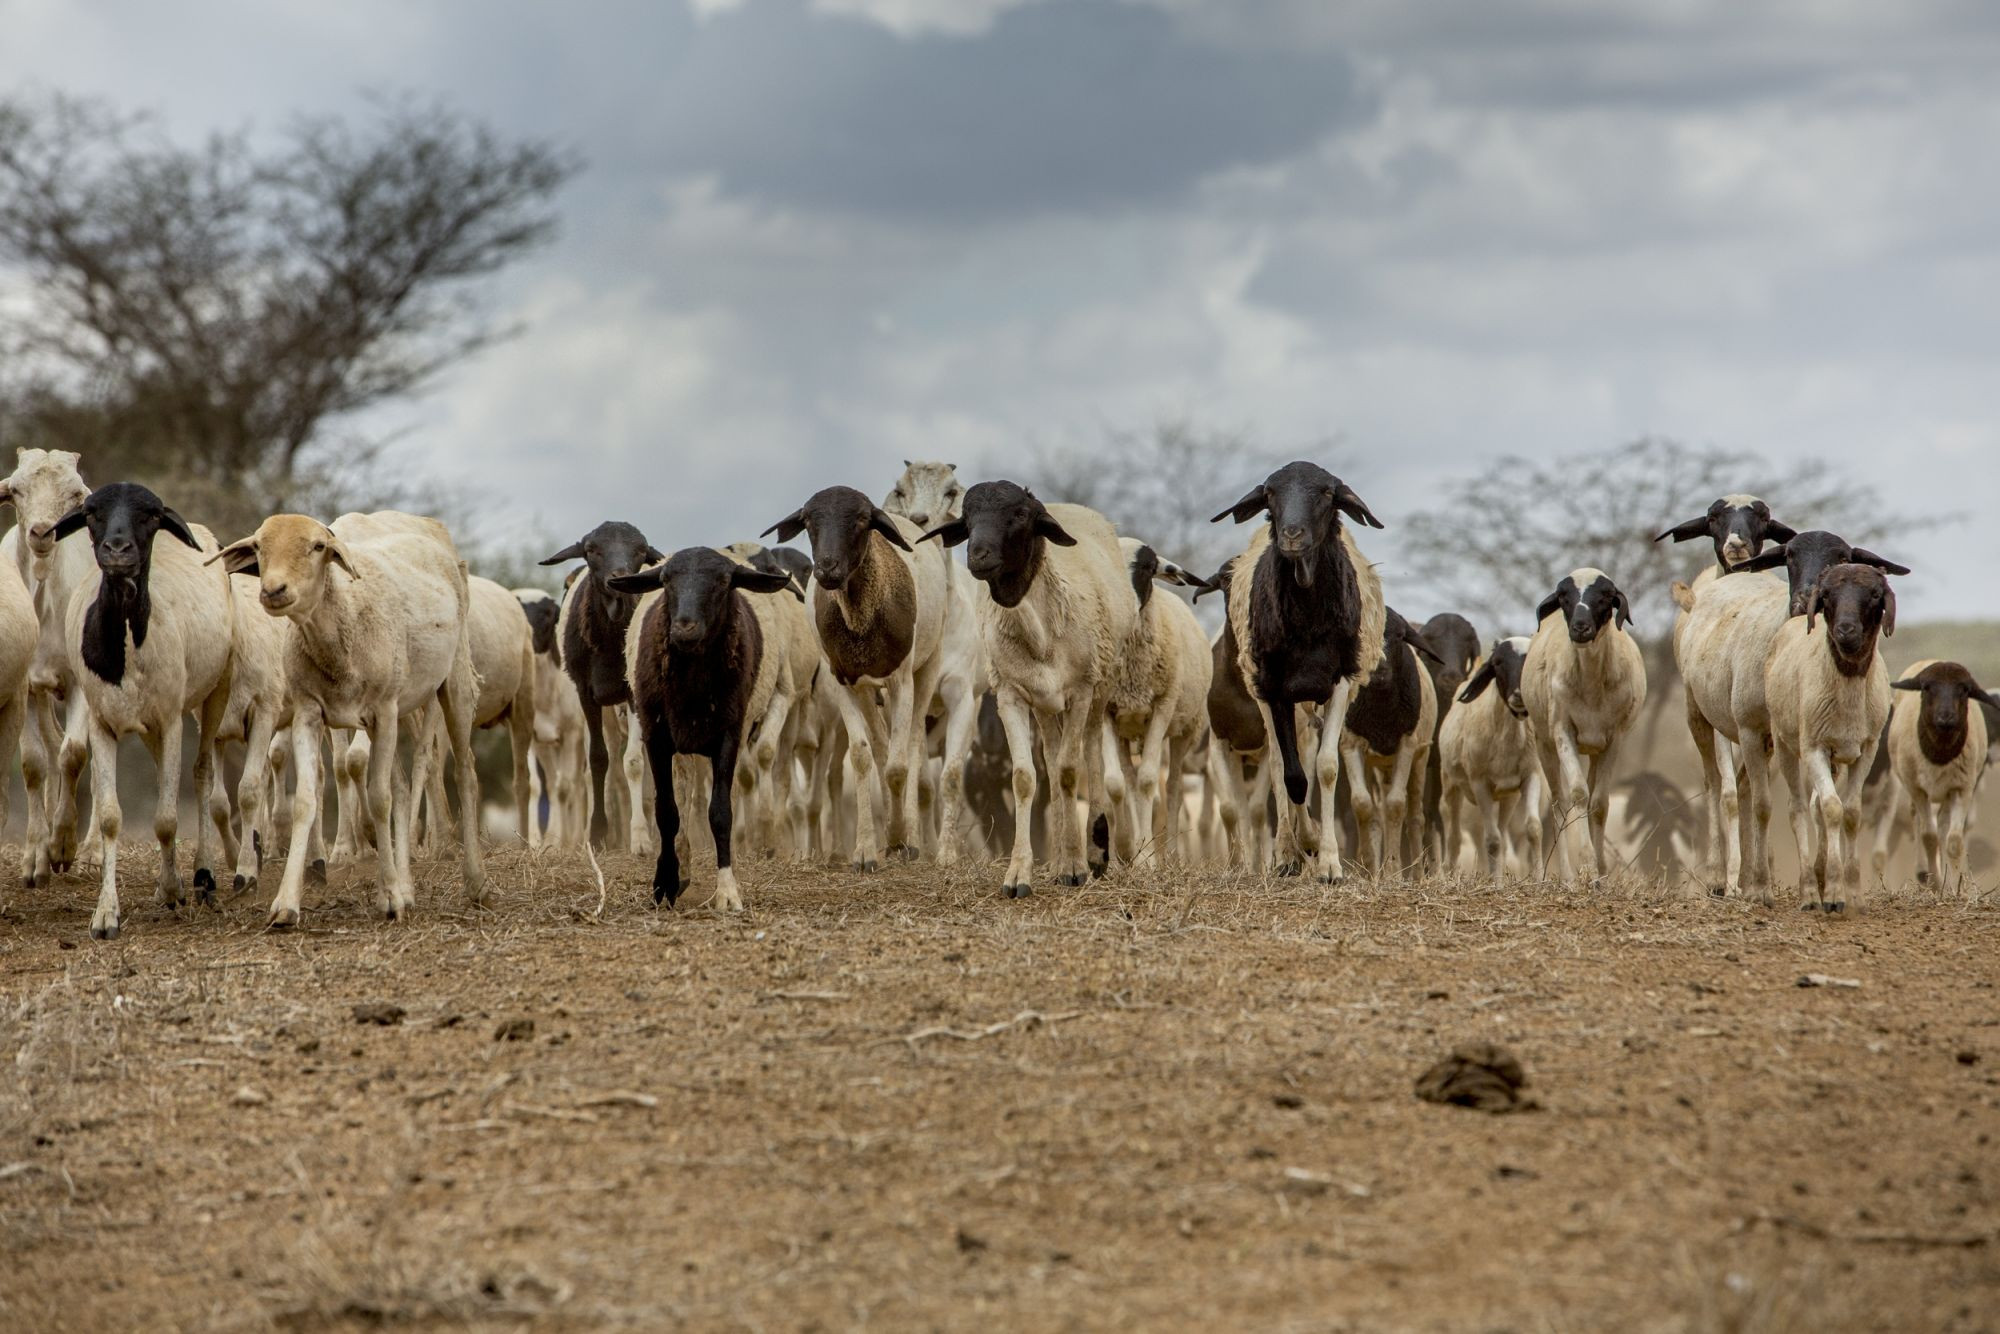 Livestock in Kajaido County, Kenya, where we've been assisting 80,000 animals suffering from an ongoing drought.